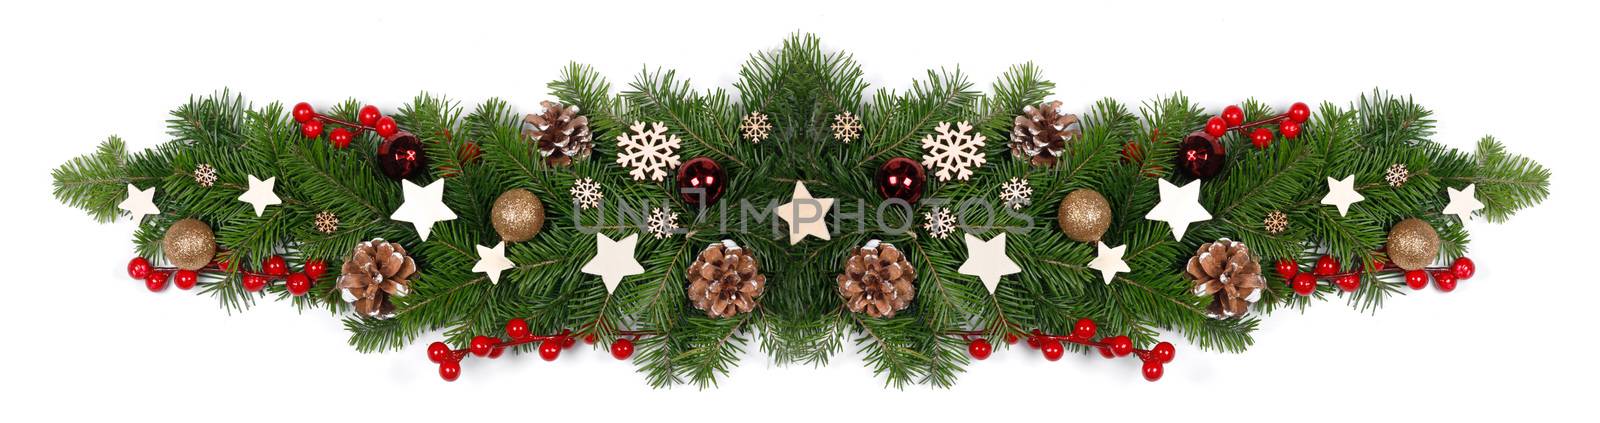 Christmas Border frame design element of tree branches and decor isolated on white background, red and wooden decor, berries, stars, cones